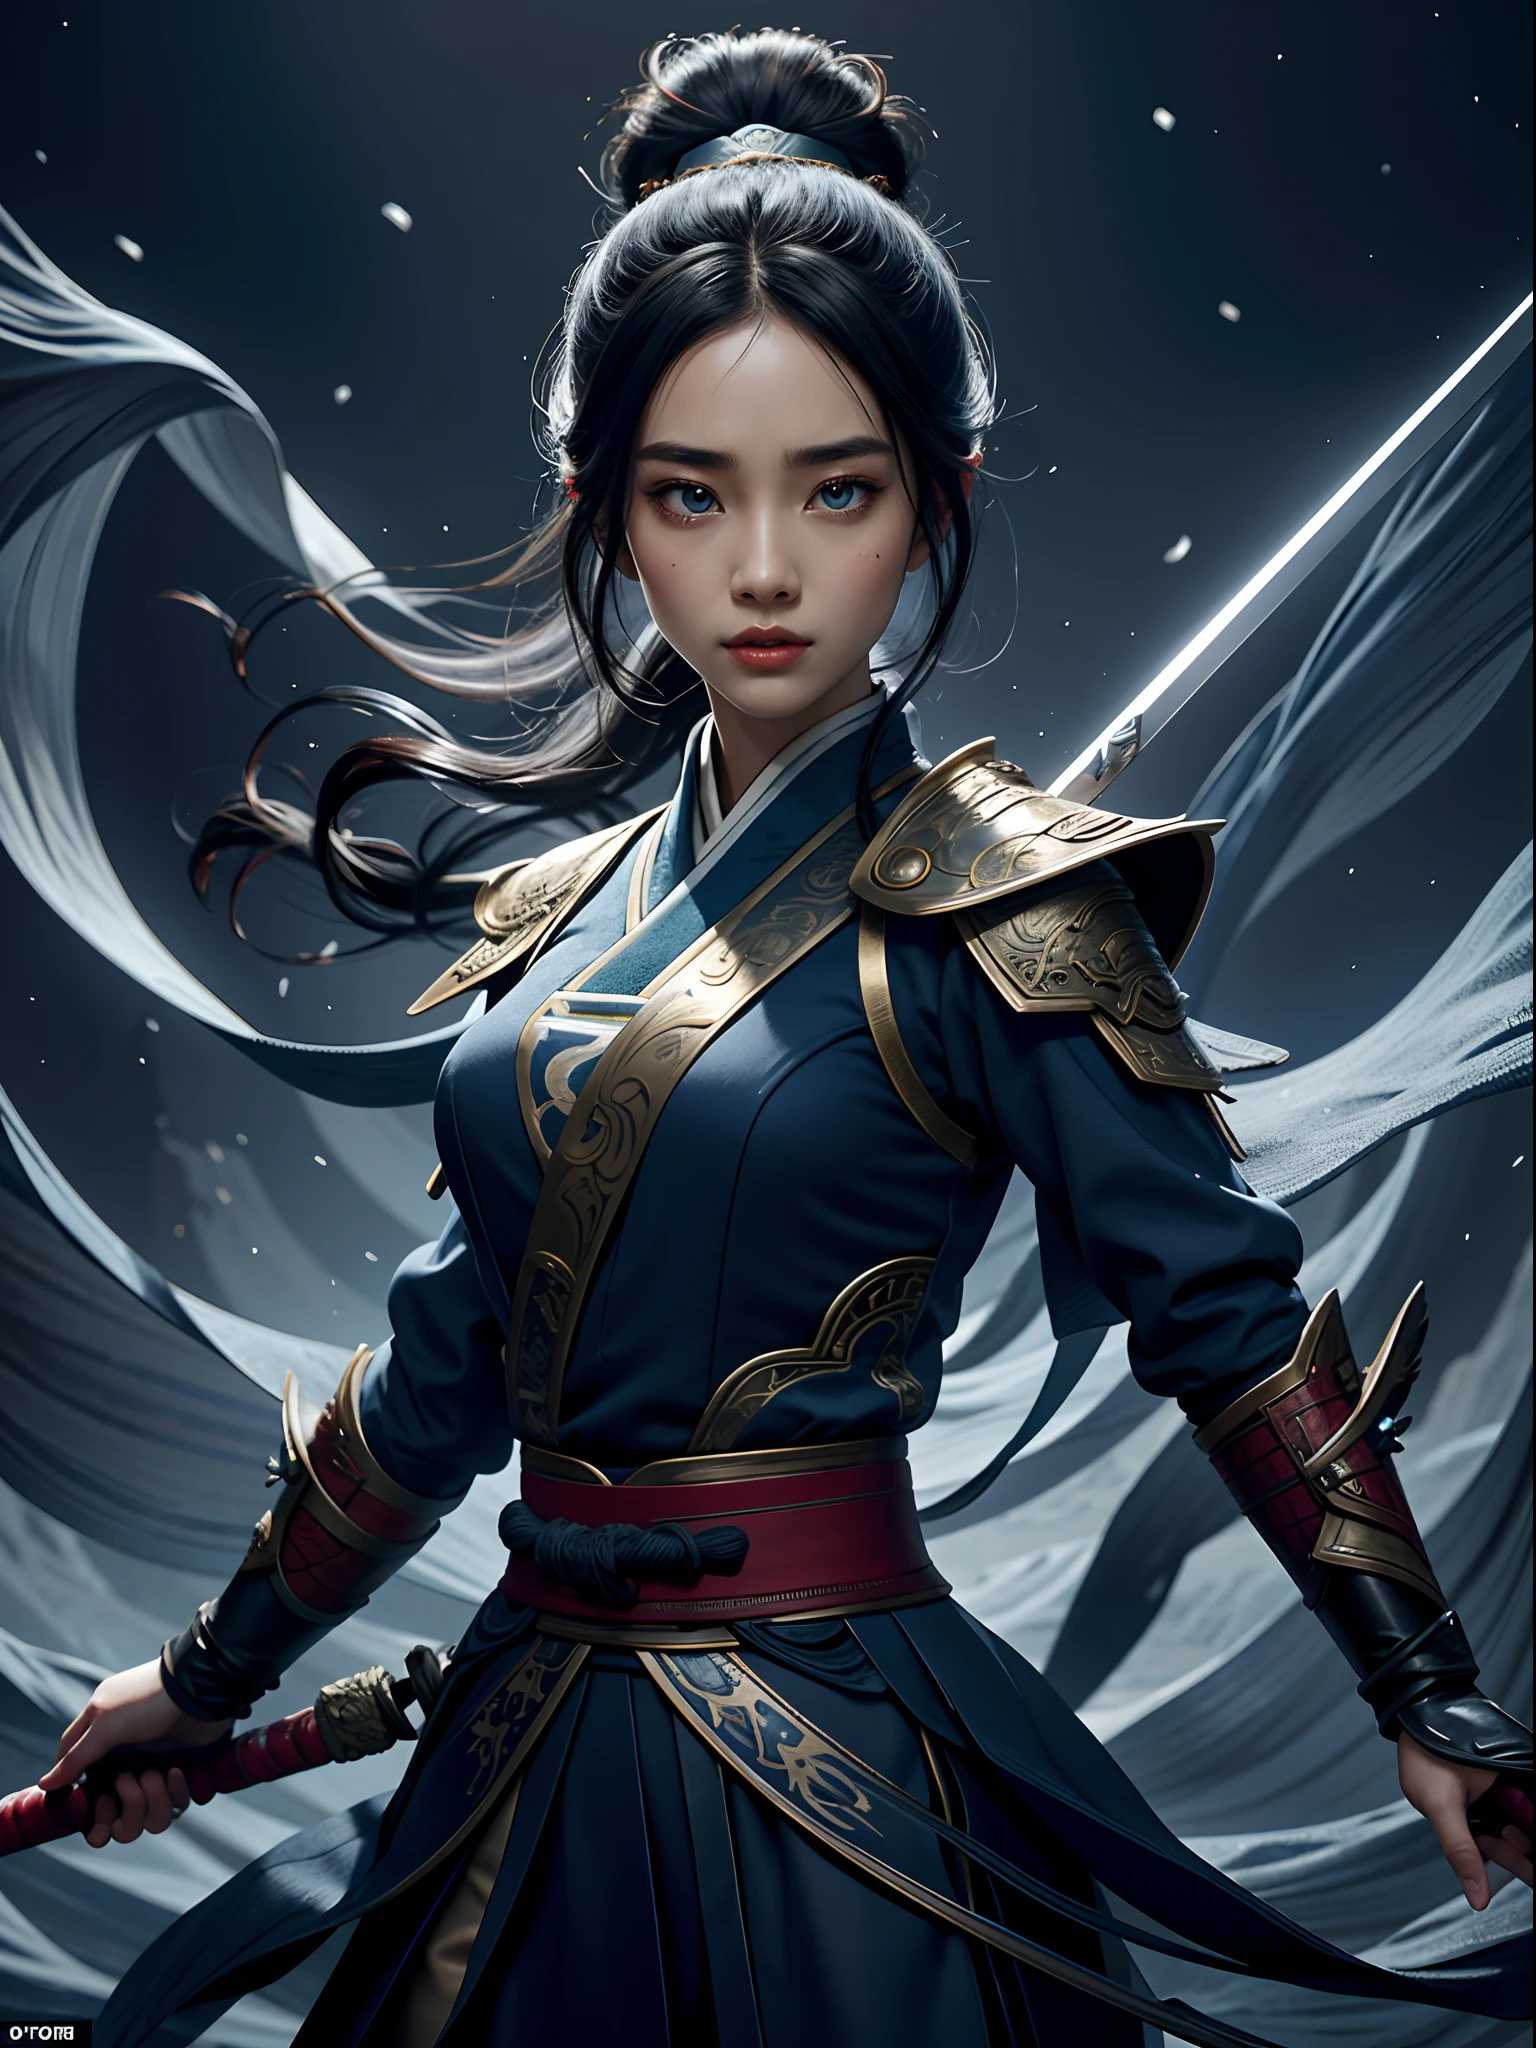 Glowing, two tone color hair, Glowing eyes, Mulan composed of red light, Mulan made up of black smoke, Black-haired Mulan，White-haired Mulan，Mulan with blue eyes glowing，Mulan，The eyes are green, Mulan in dark blue armor，Mulan in golden armor，a 3D render (Close-up of Mulan holding a sword), （A very long sword，Shining with cold light），（A sword with a dragon pattern），The surface of the sword is as smooth as a mirror，Cold light flashes，The hilt of the sword is inlaid with precious jade and wood，The upper body wears dark blue armor made of fish scales and iron， The armor was also inlaid with golden stars，floral embroidery，Cloak decorated in black and gold， Very long hair, Ebony hair, Big black eyes, Long eyelashes, Sexy red lips, Resolute expression, disney movie《Mulan》, Martial arts, Kungfu, Chinese exquisite clothing, ， 1 Mulan, Solo, Ancient wind，WABSTYLE STYLE, Background with: It was snowing heavily，It was snowing heavily，It was snowing heavily in the sky， Hurricane weather，vortex,,{{Masterpiece}}, {{{Best quality}}},{{Ultra-detailed}}, {{illustration}},{{Disheveled hair}},{{Masterpiece}},{{{Best quality}}},{{Ultra-detailed}}, {{{illustration}}},{{Disheveled hair}},Clear facial features,close up photograph,,Alphonse Mucha,Pixar style,Cartoon style,beatrix potter ,Refined atmosphere,Intense atmosphere, microscopic view,Close-up(CU),Extreme closeup,back Lighting,